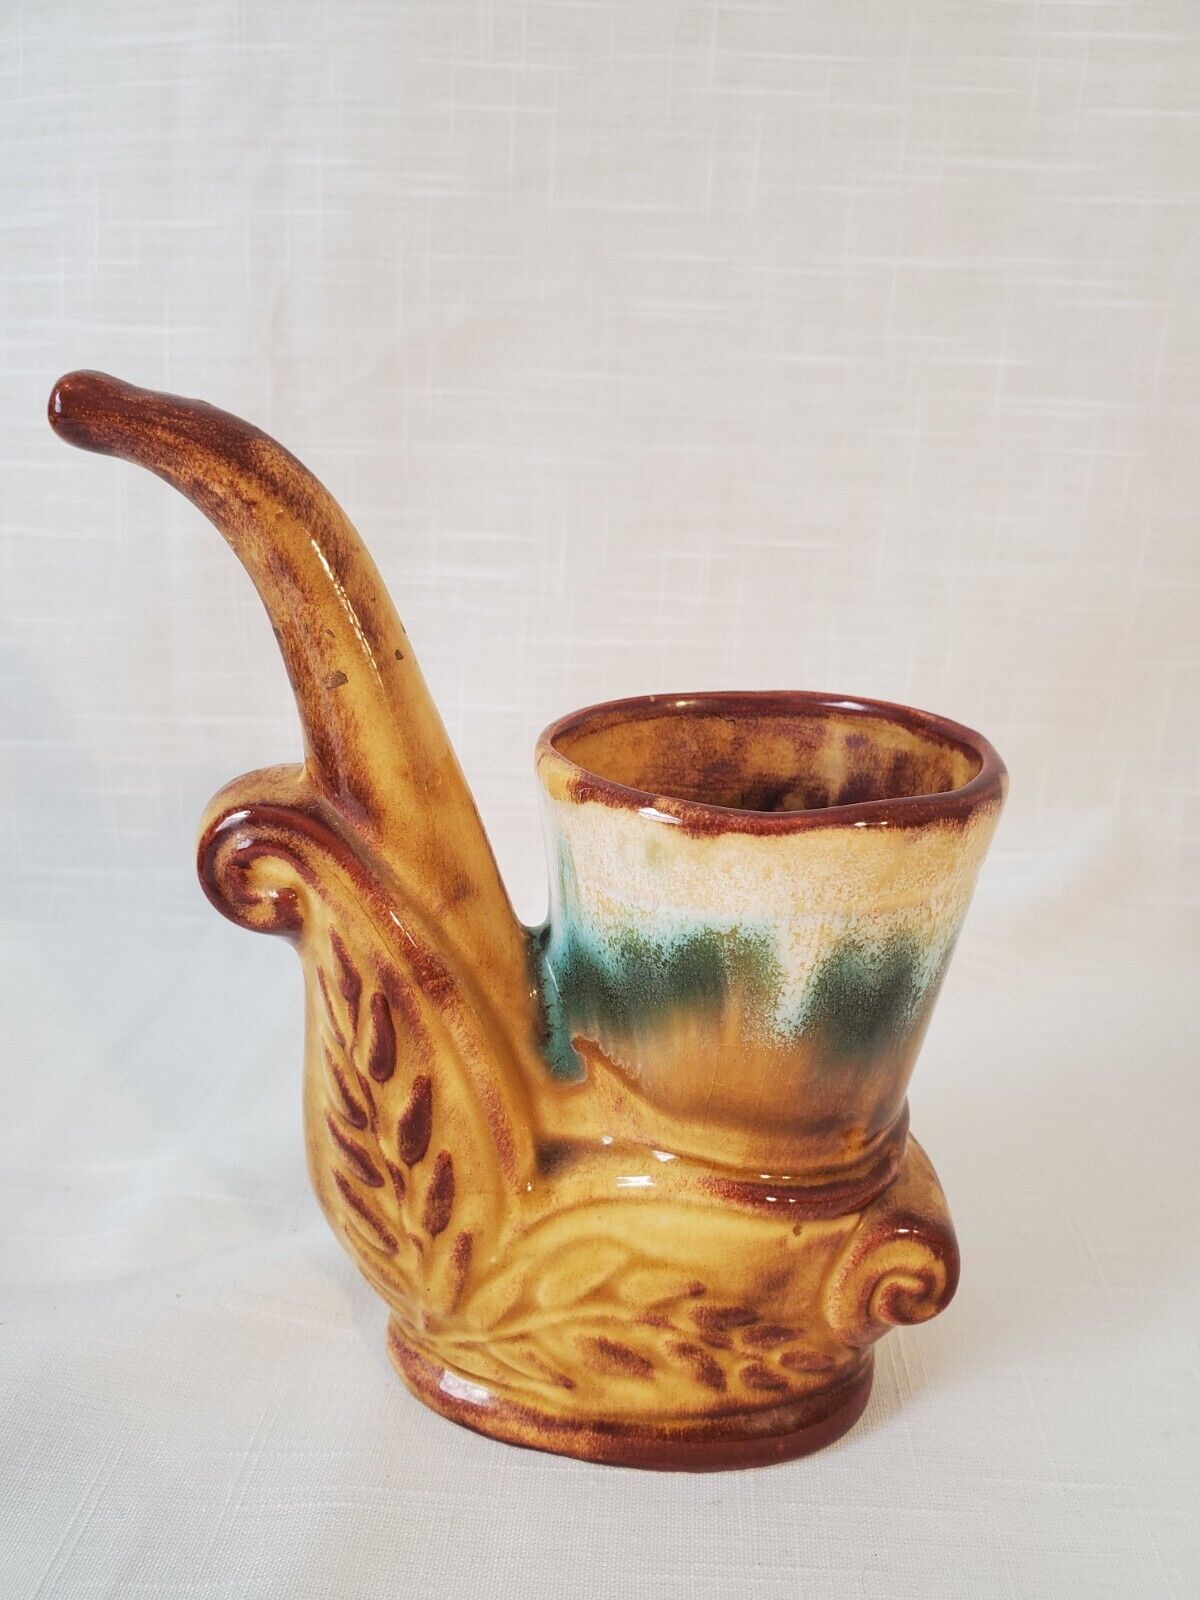 Vtg California Ceramic Candle Holder Pipe With Green Glazing Around The Top.